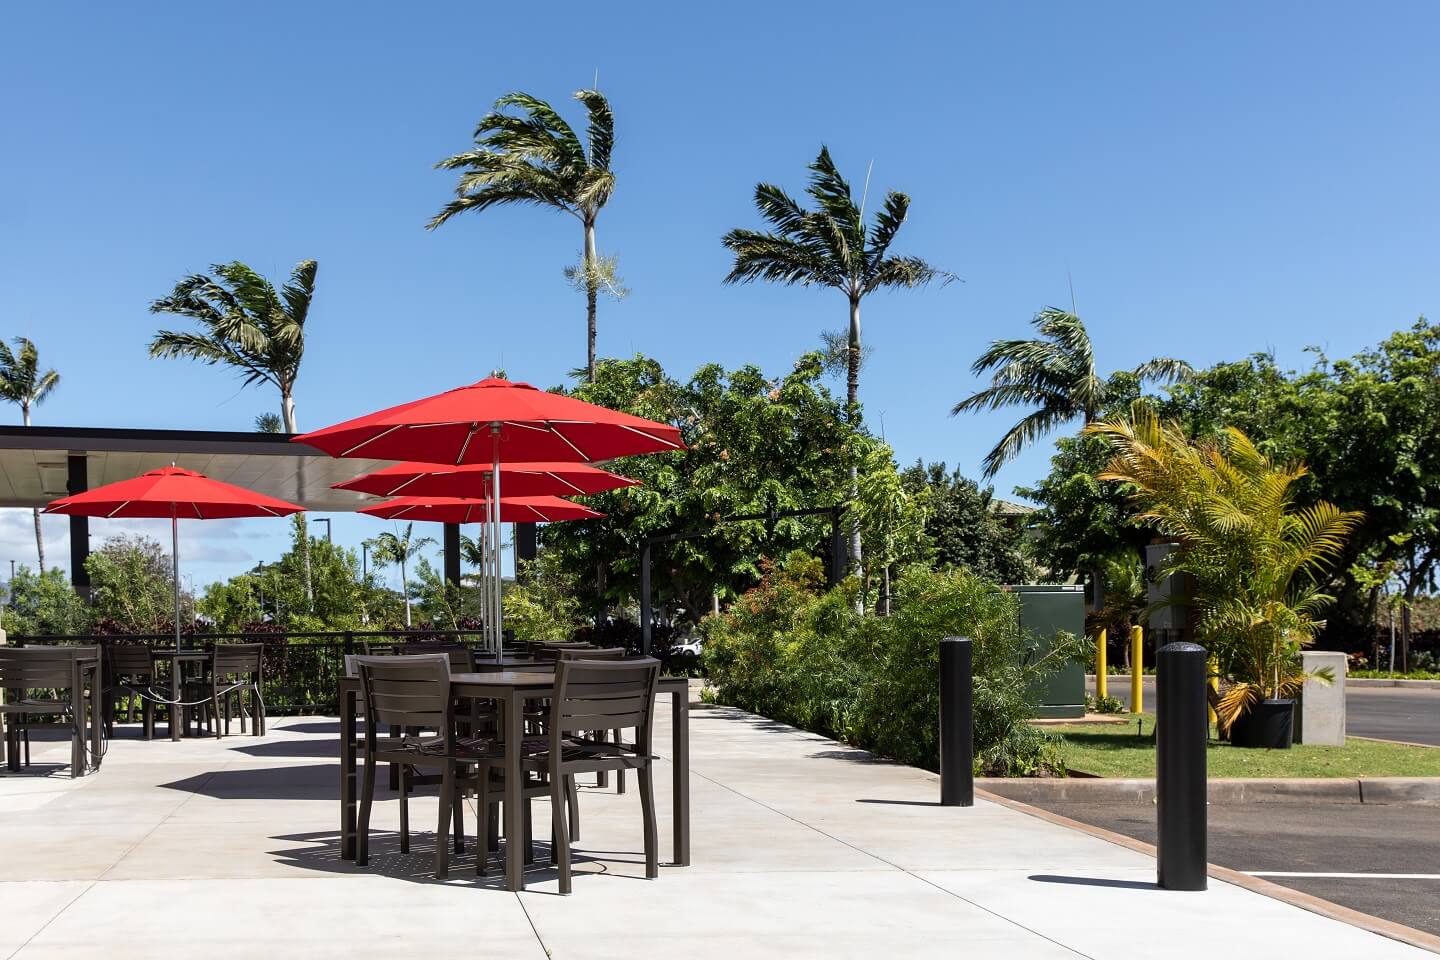 The patio outside ﻿of the Hawaii Chick-fil-A restaurant